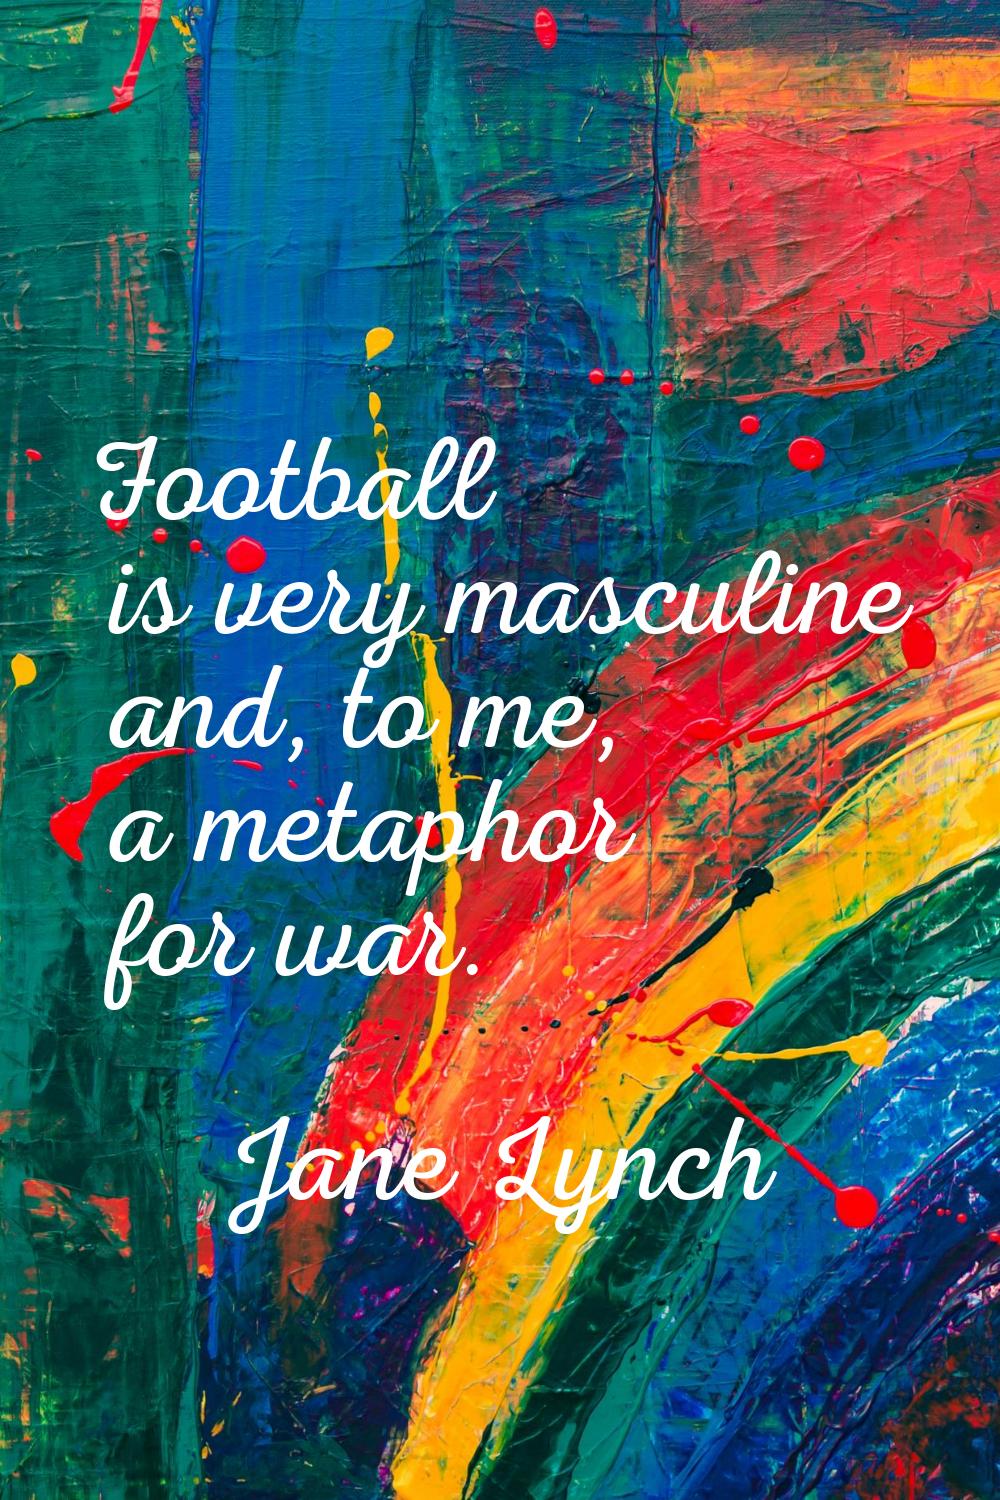 Football is very masculine and, to me, a metaphor for war.